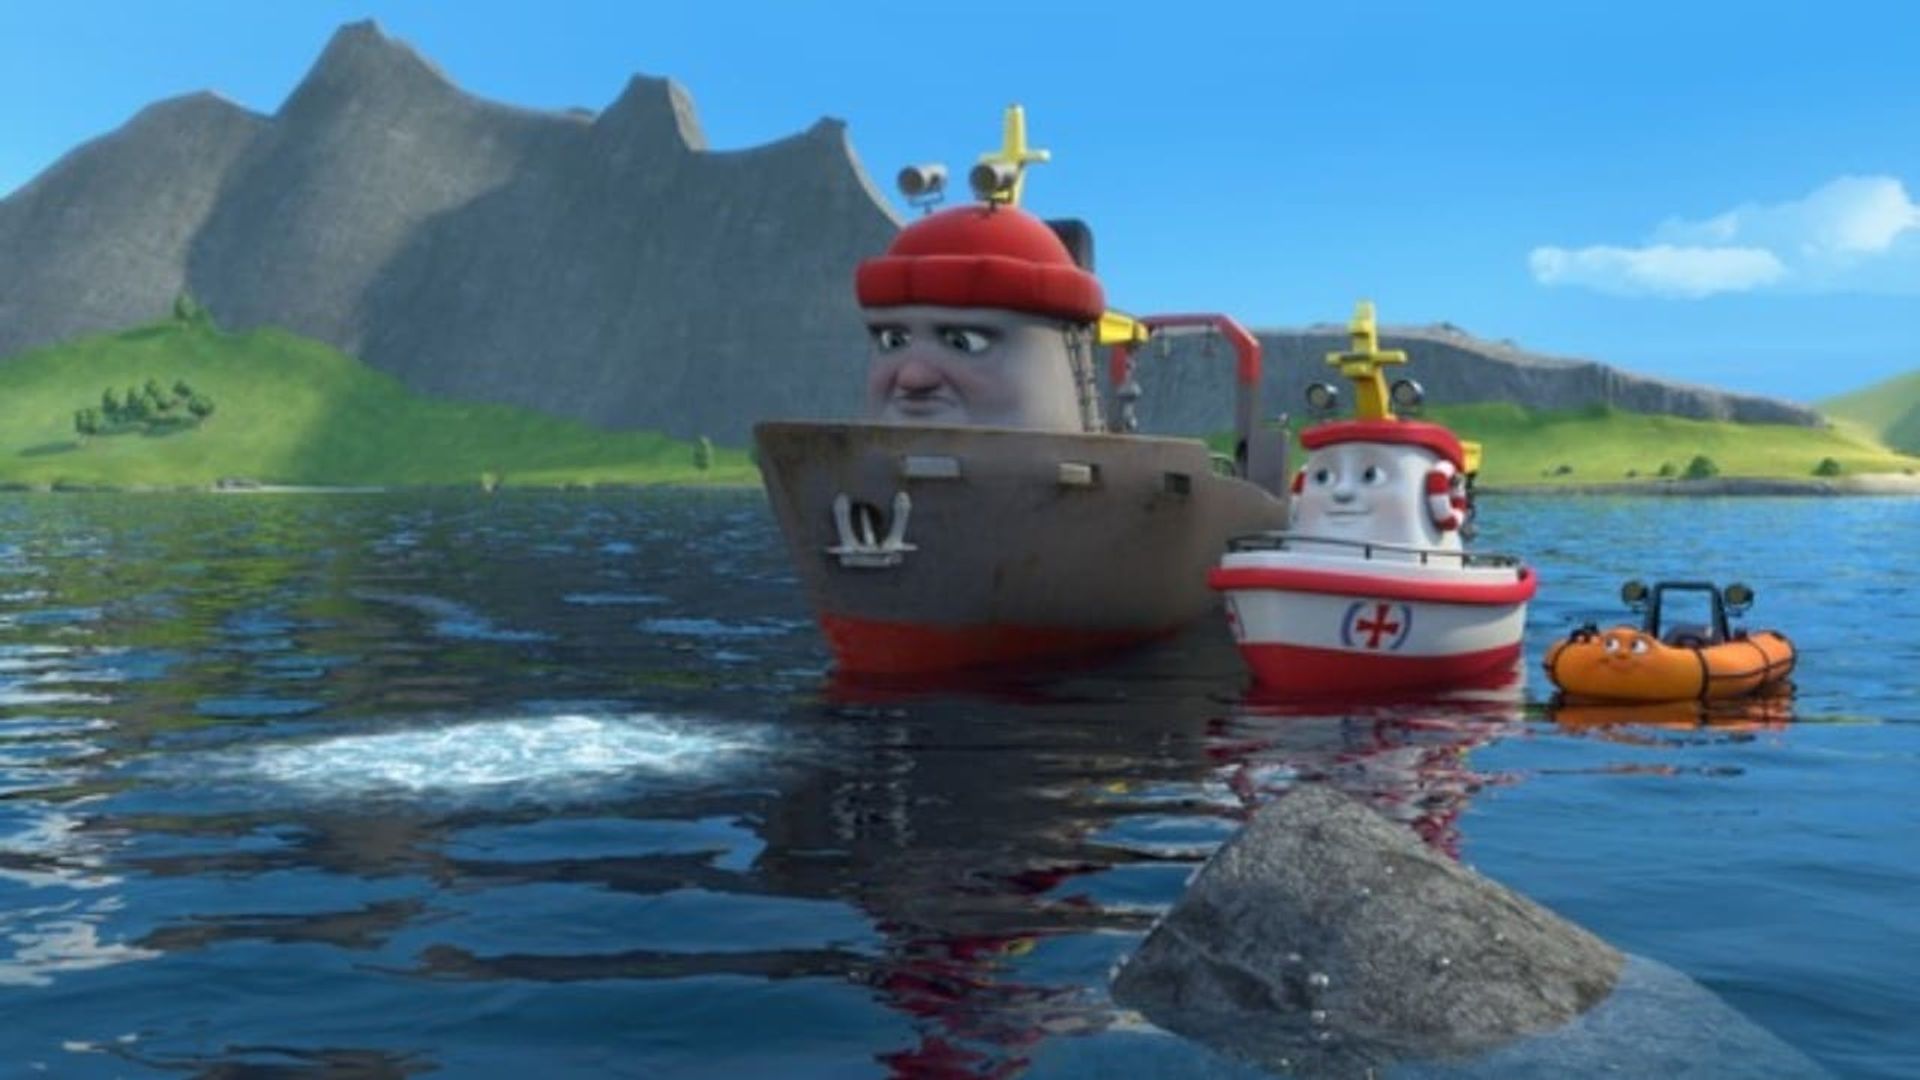 Elias: The Little Rescue Boat background